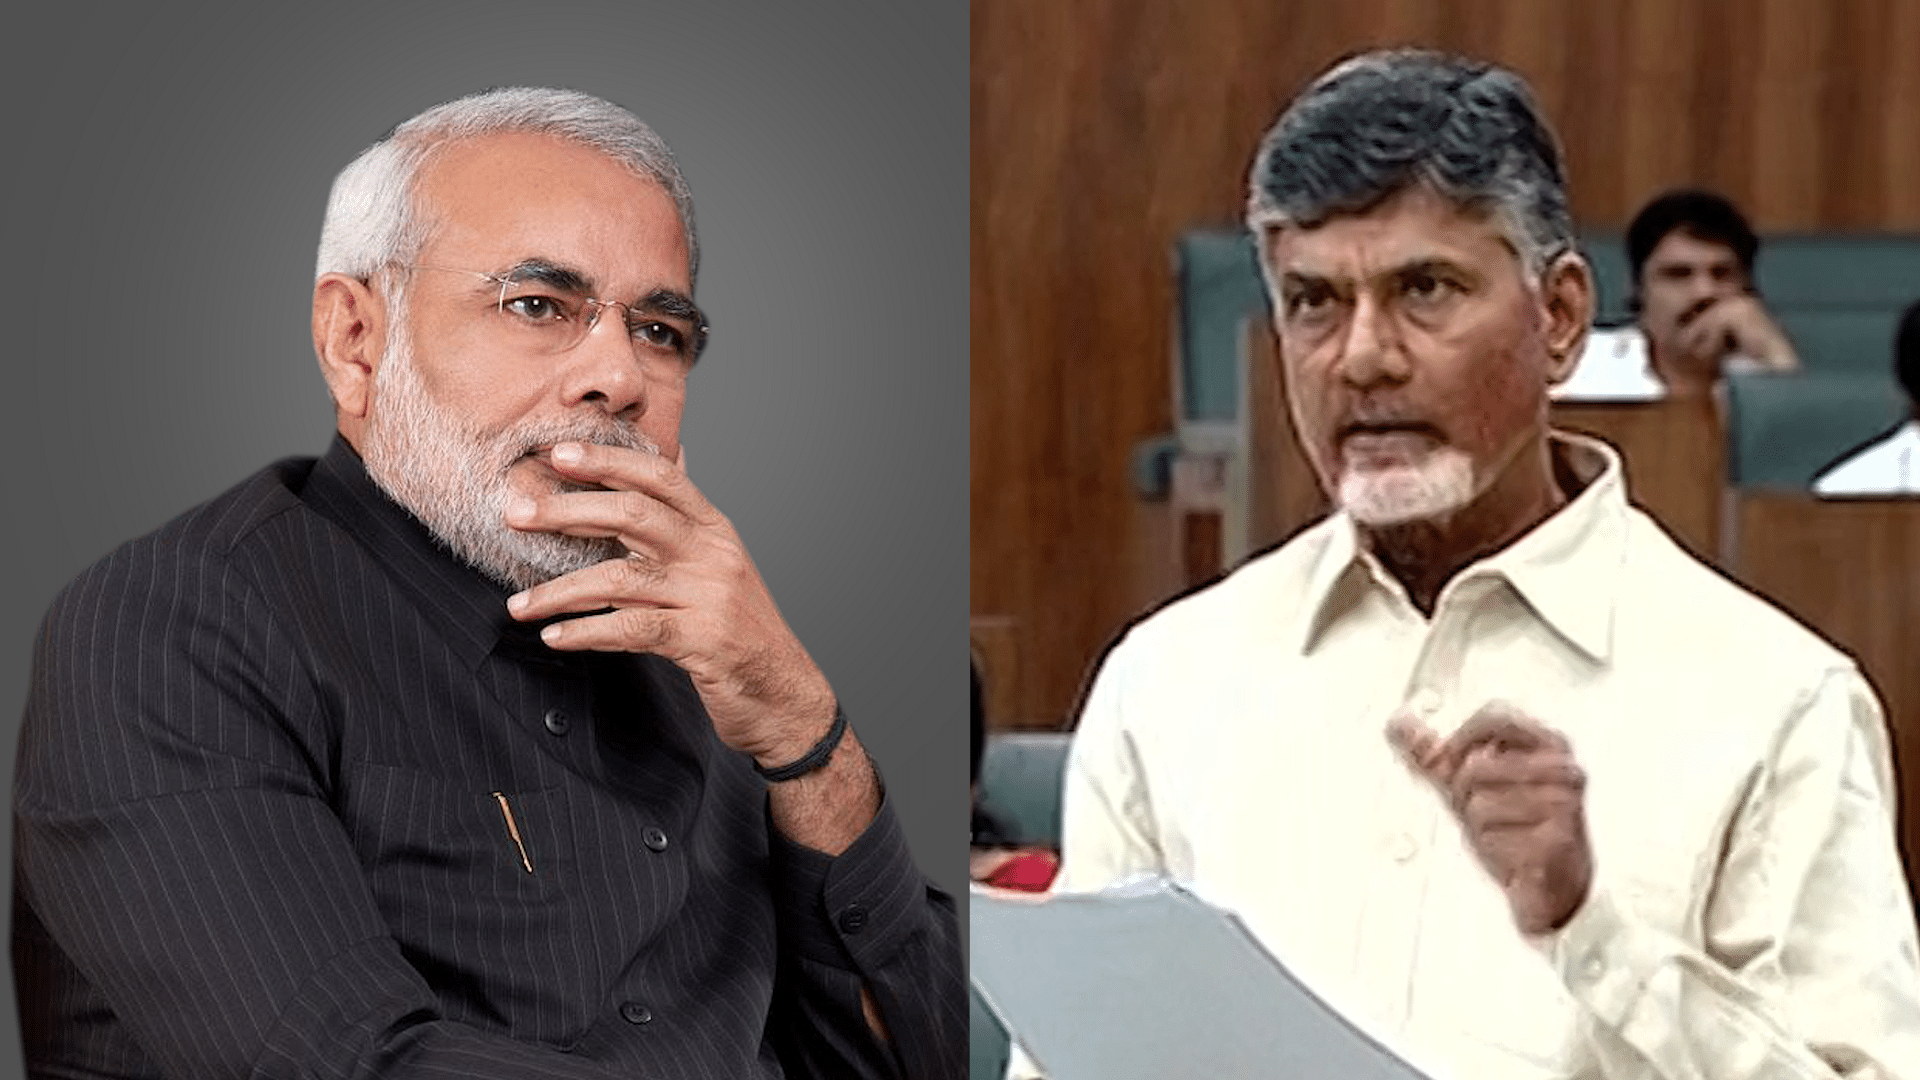 The TDP and the BJP had fought the 2014 elections together but have since had a fallout, with the TDP alleging that BJP went back on its promise of granting special status to Andhra Pradesh.